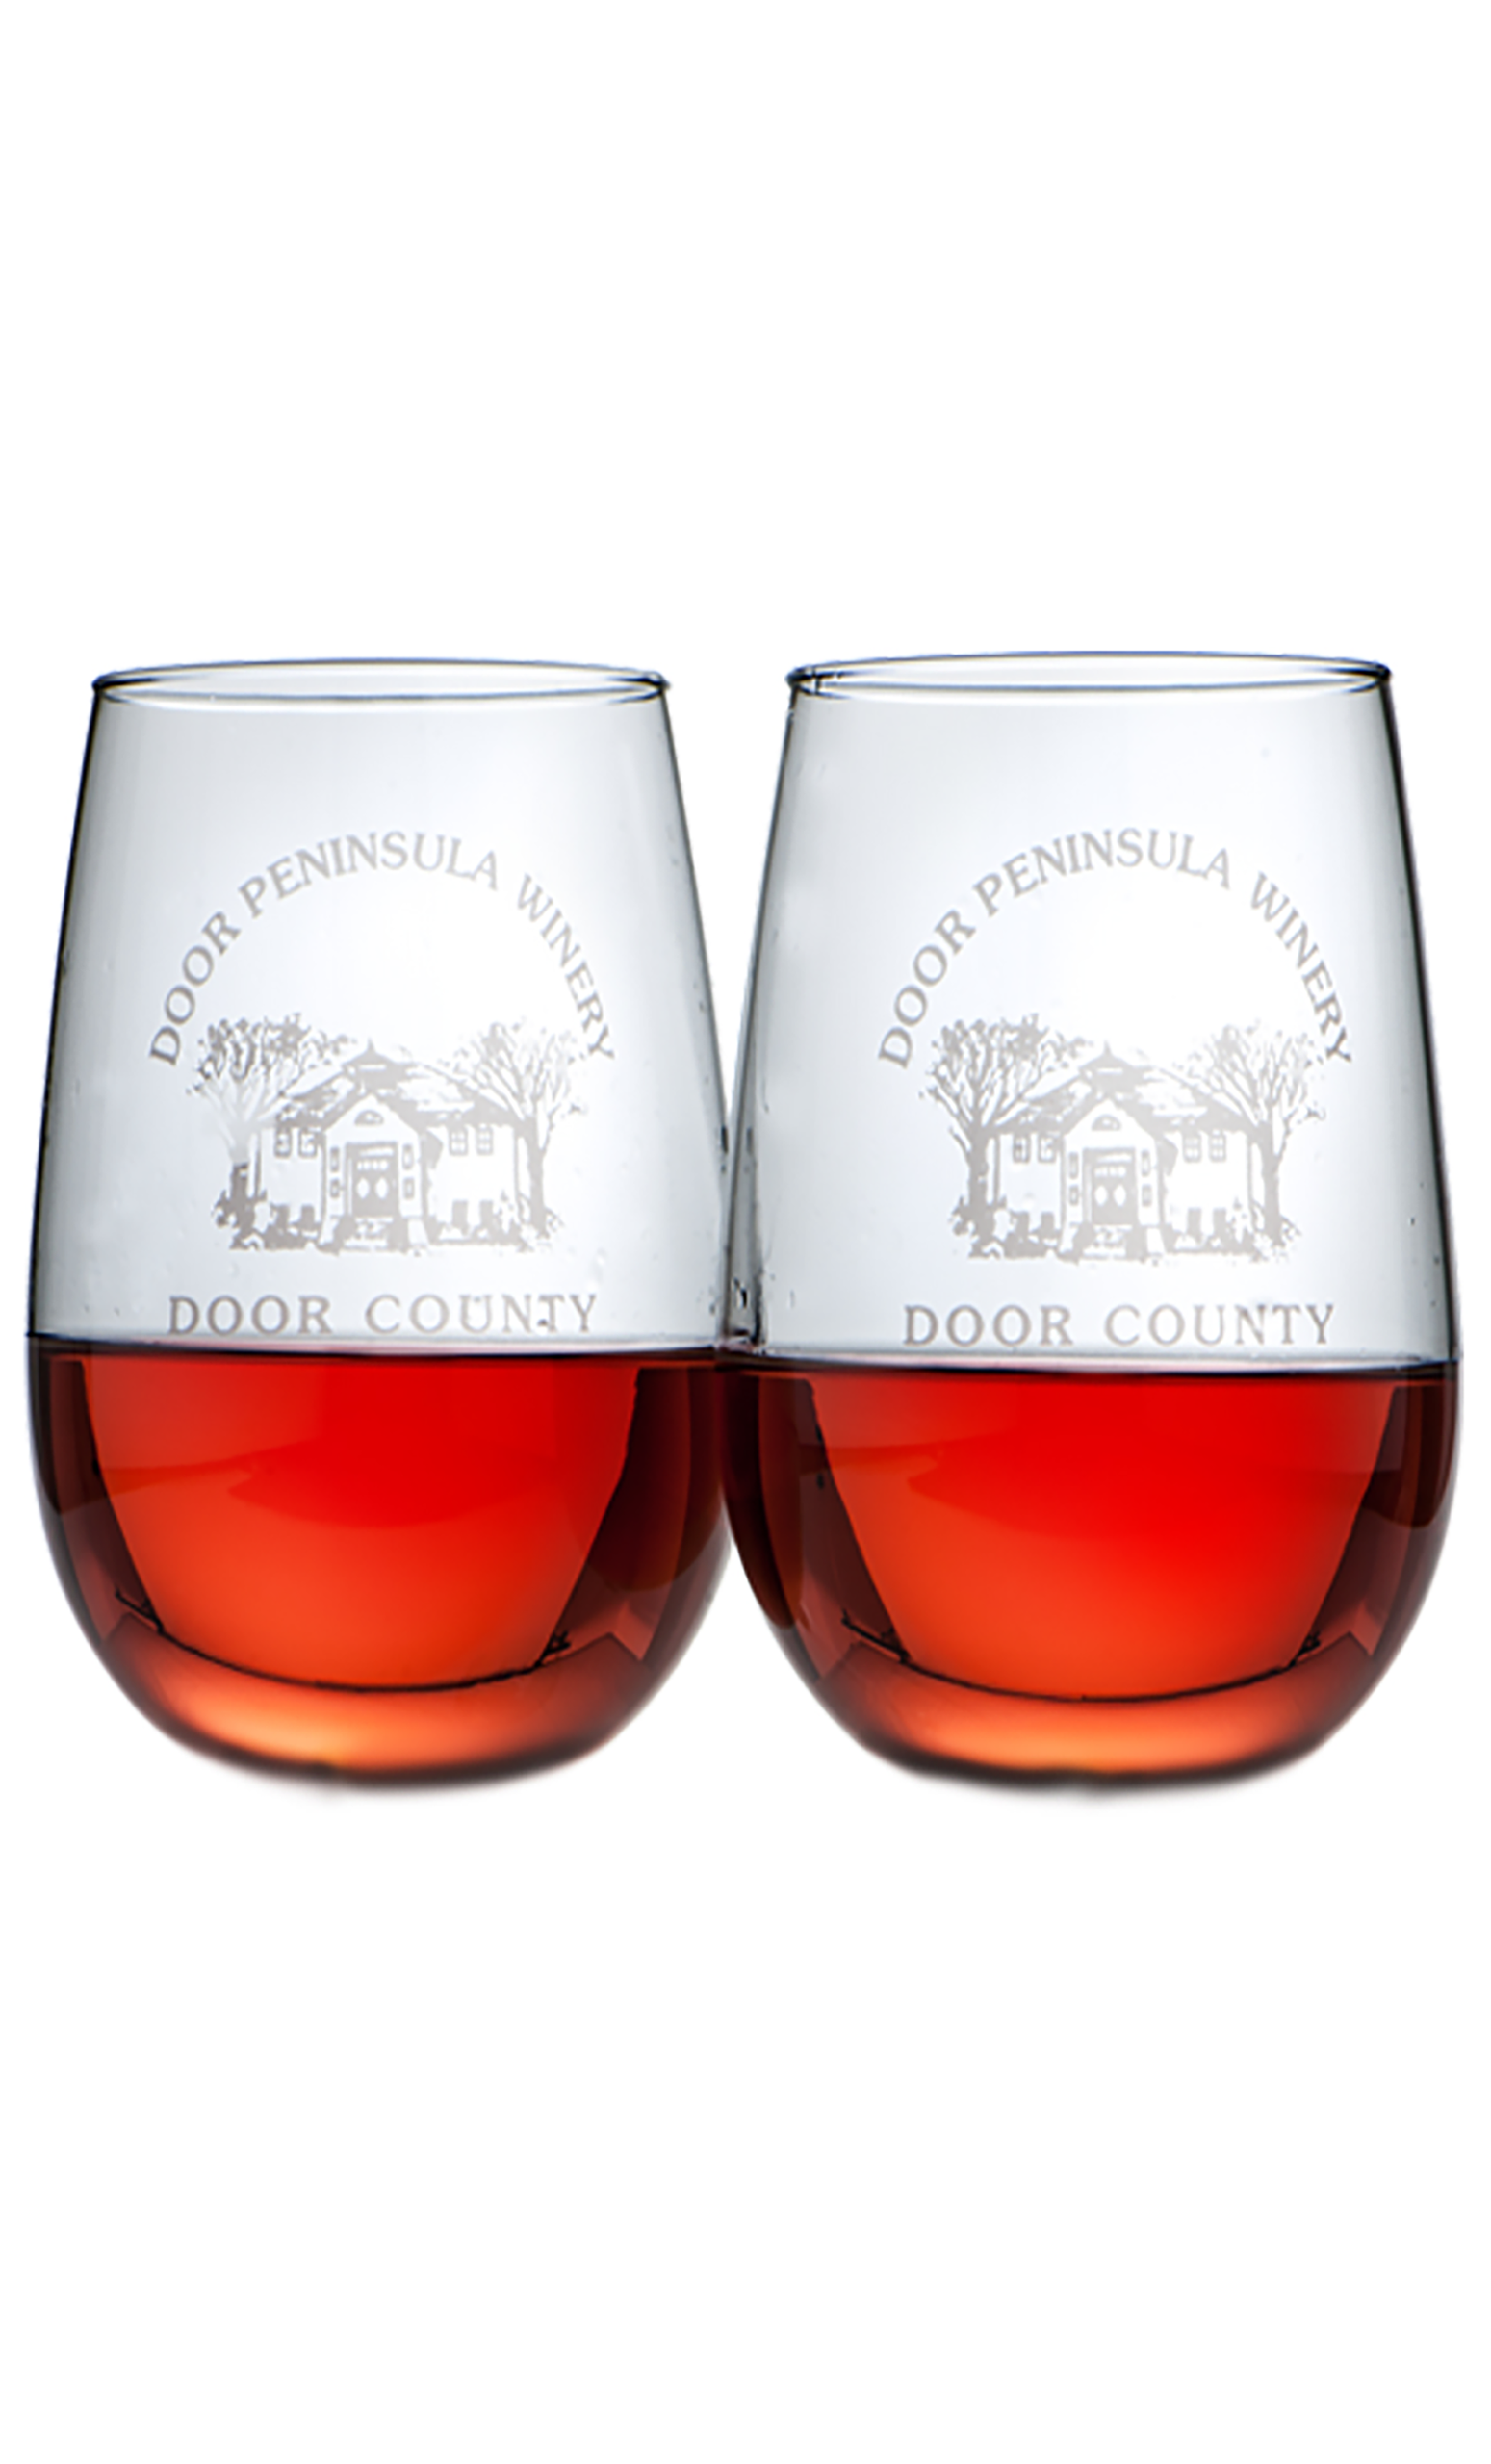 https://store.dcwine.com/winery/wp-content/uploads/2022/01/Stemless-Web.png